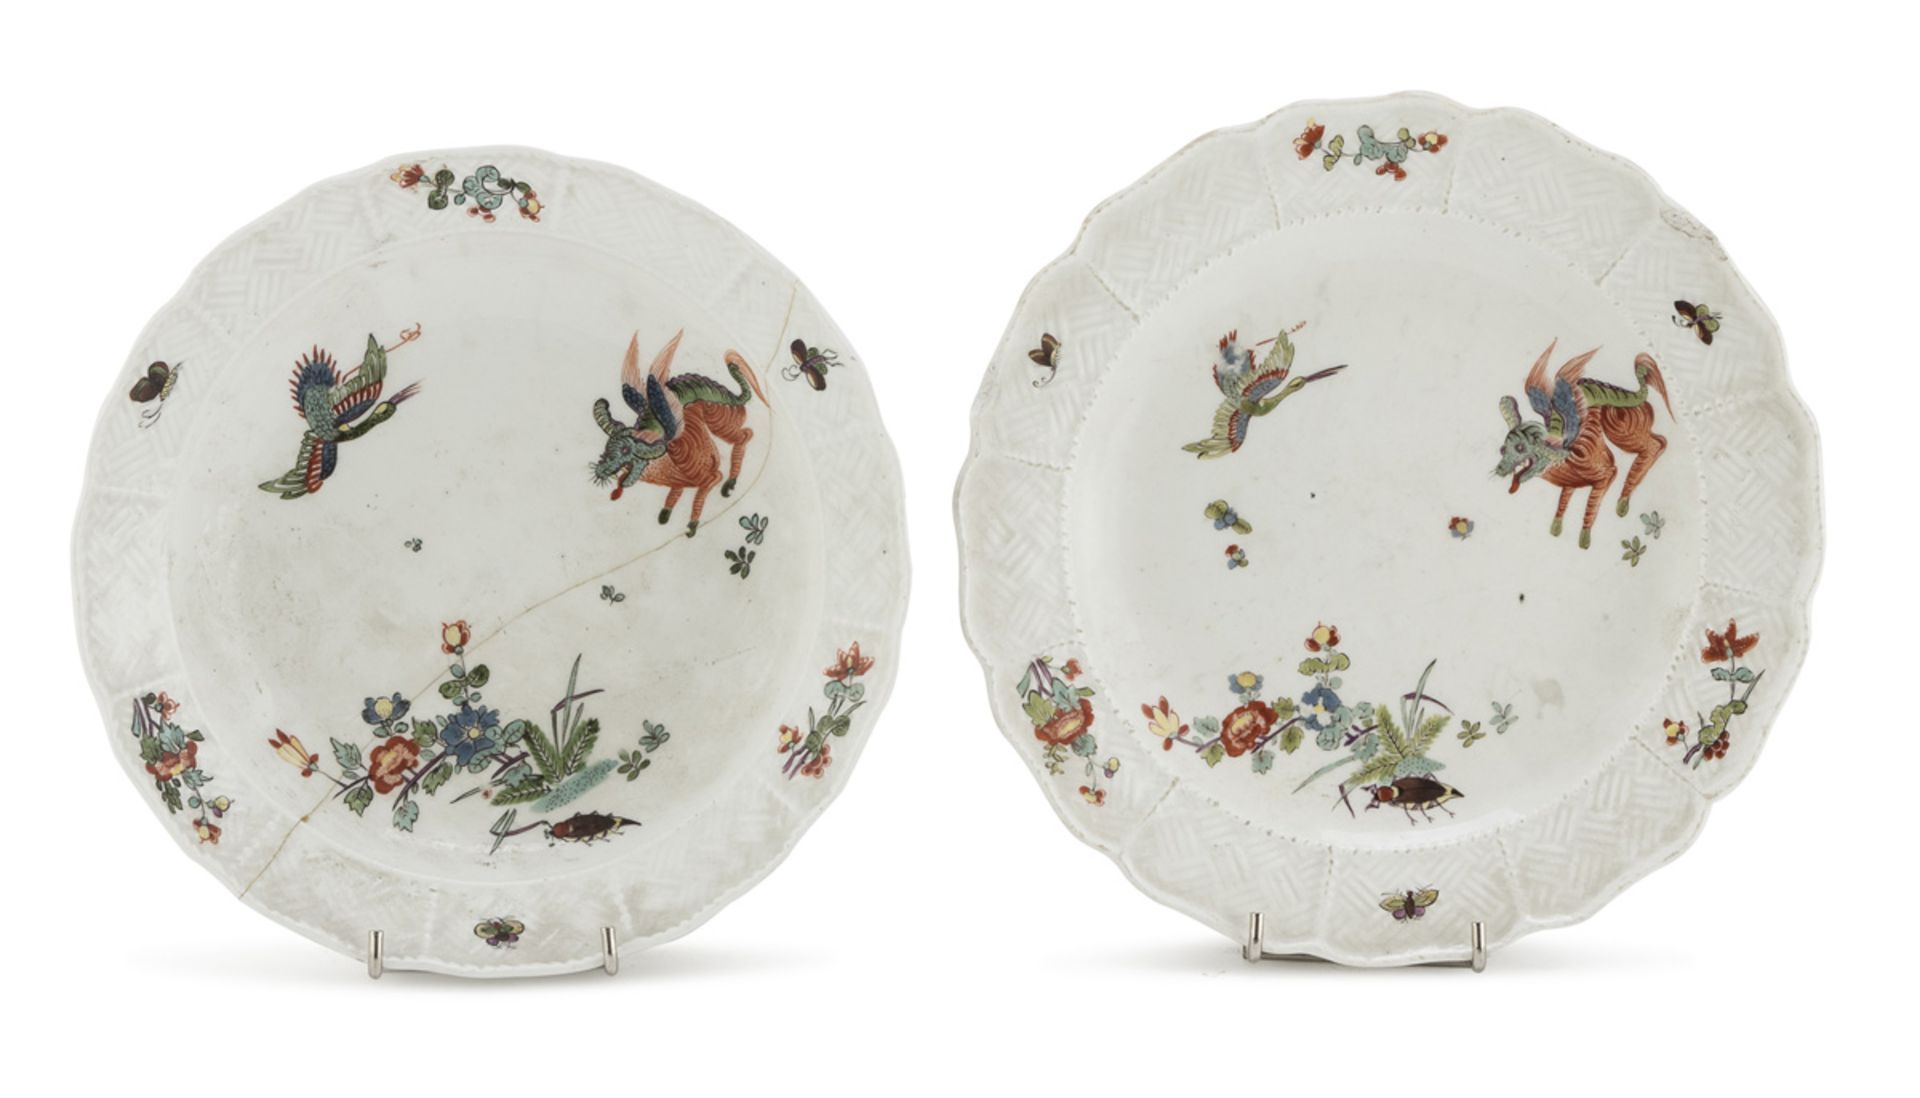 A FLAT AND A DEEP PORCELAIN DISH MEISSEN MID 18th CENTURY